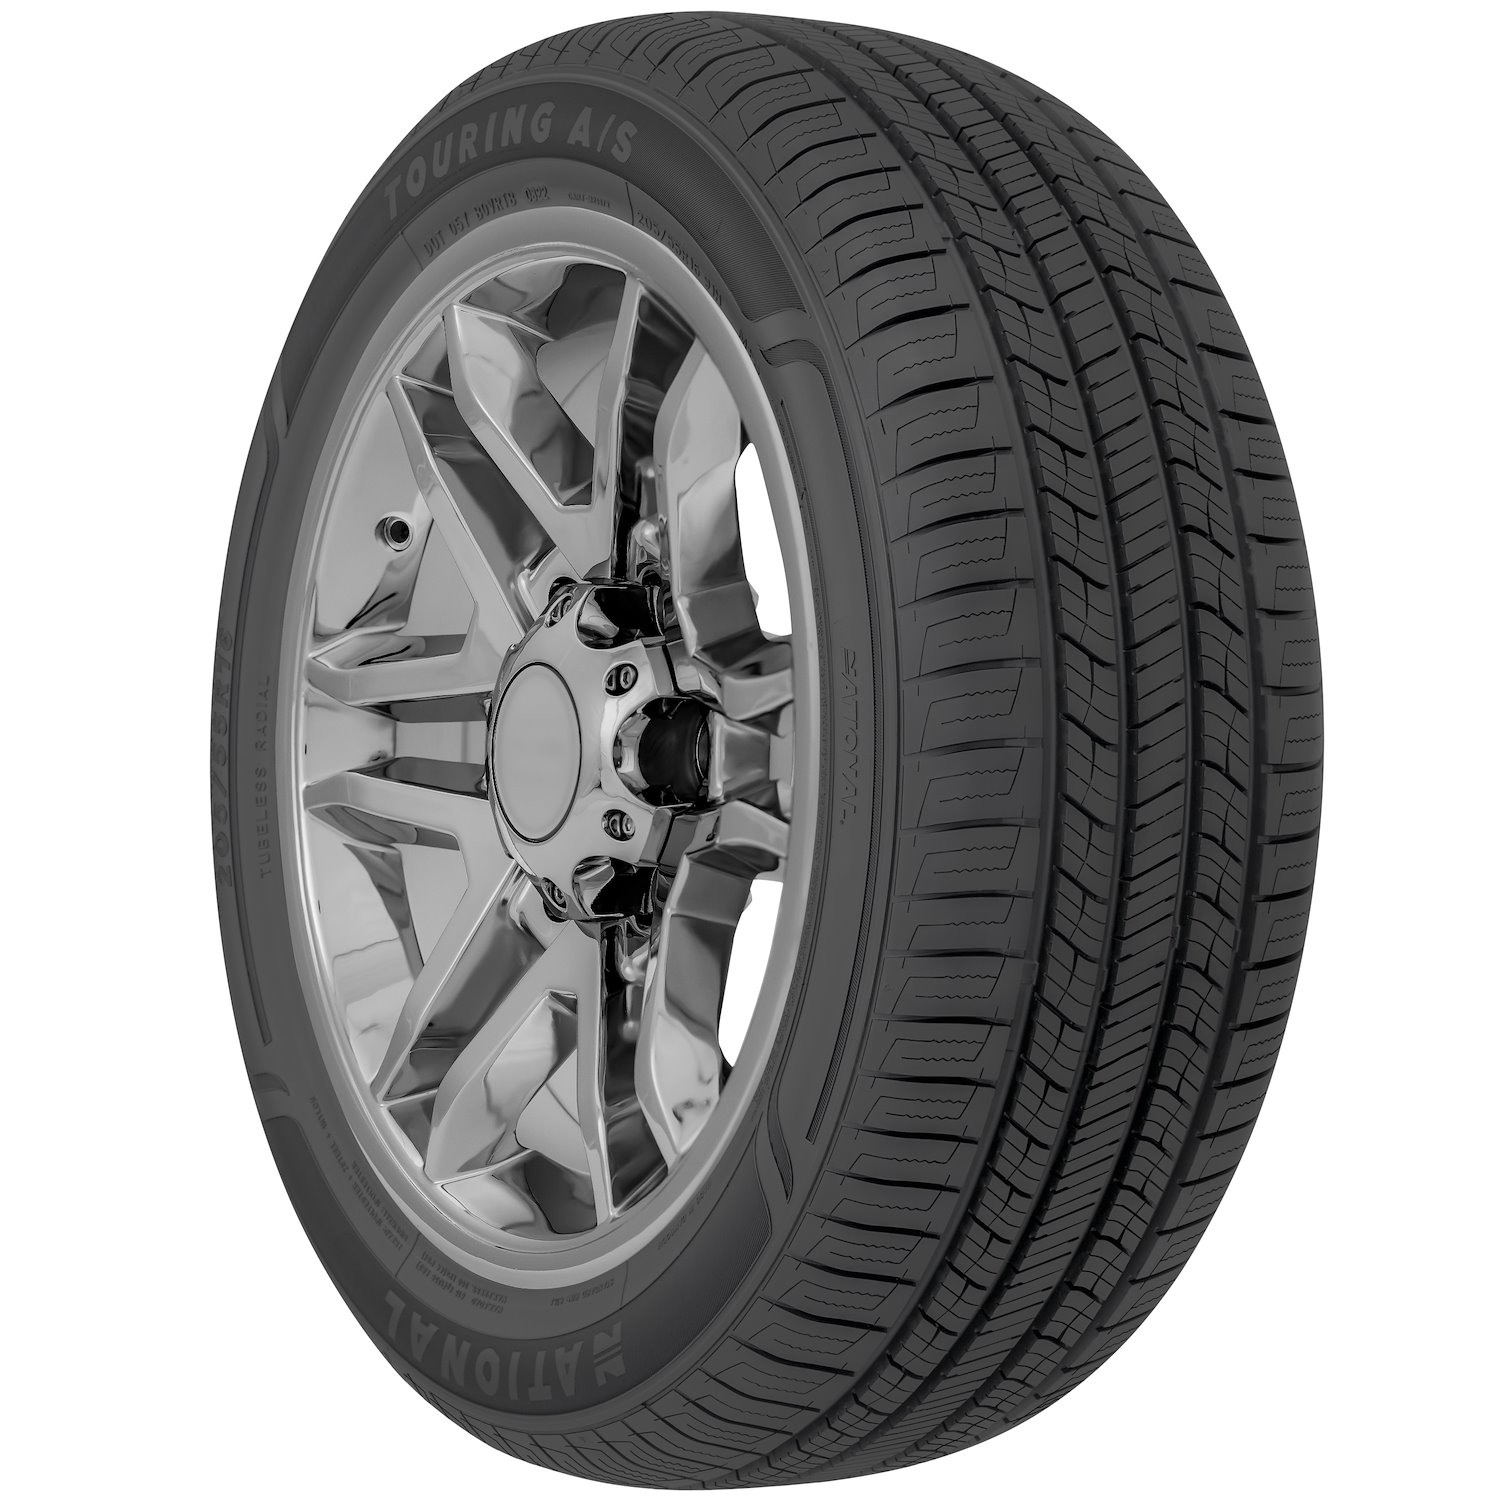 NLR66 Touring A/S Tire, 225/50R17